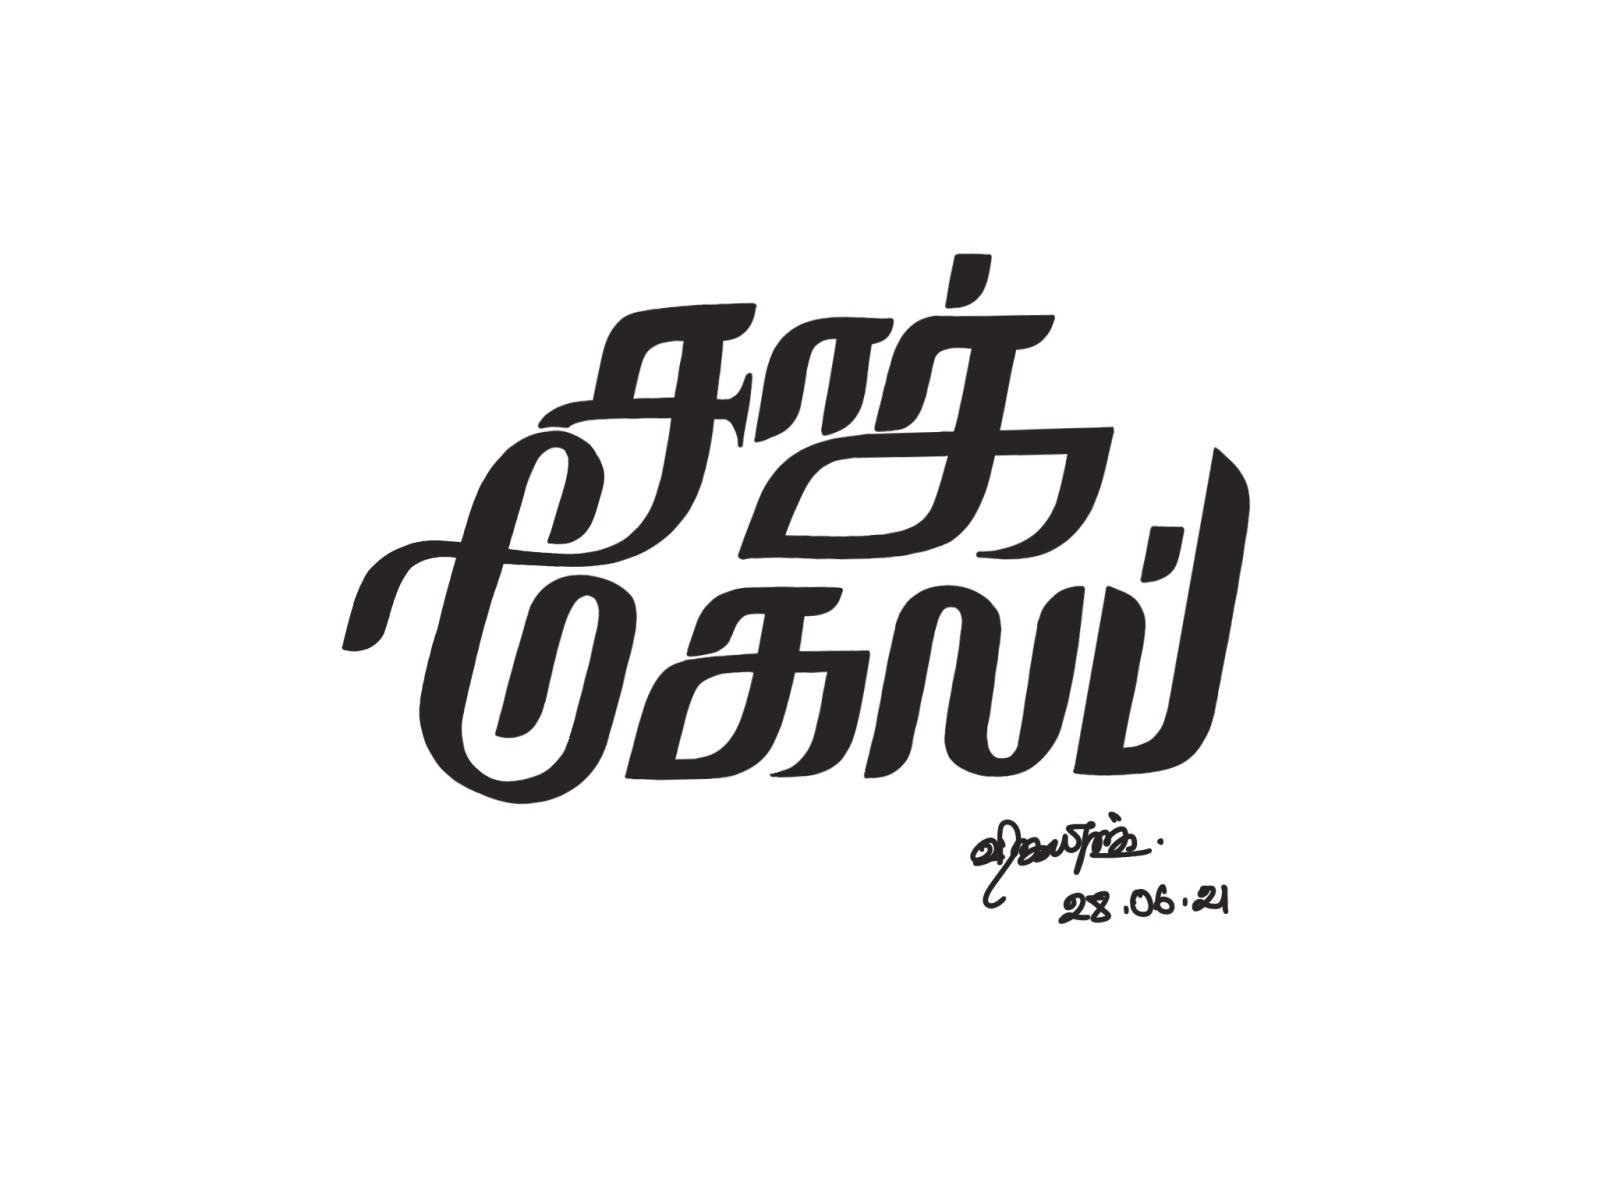 Sasi Wins tattoos  Tamil letter font with heart beat tattoo  Facebook